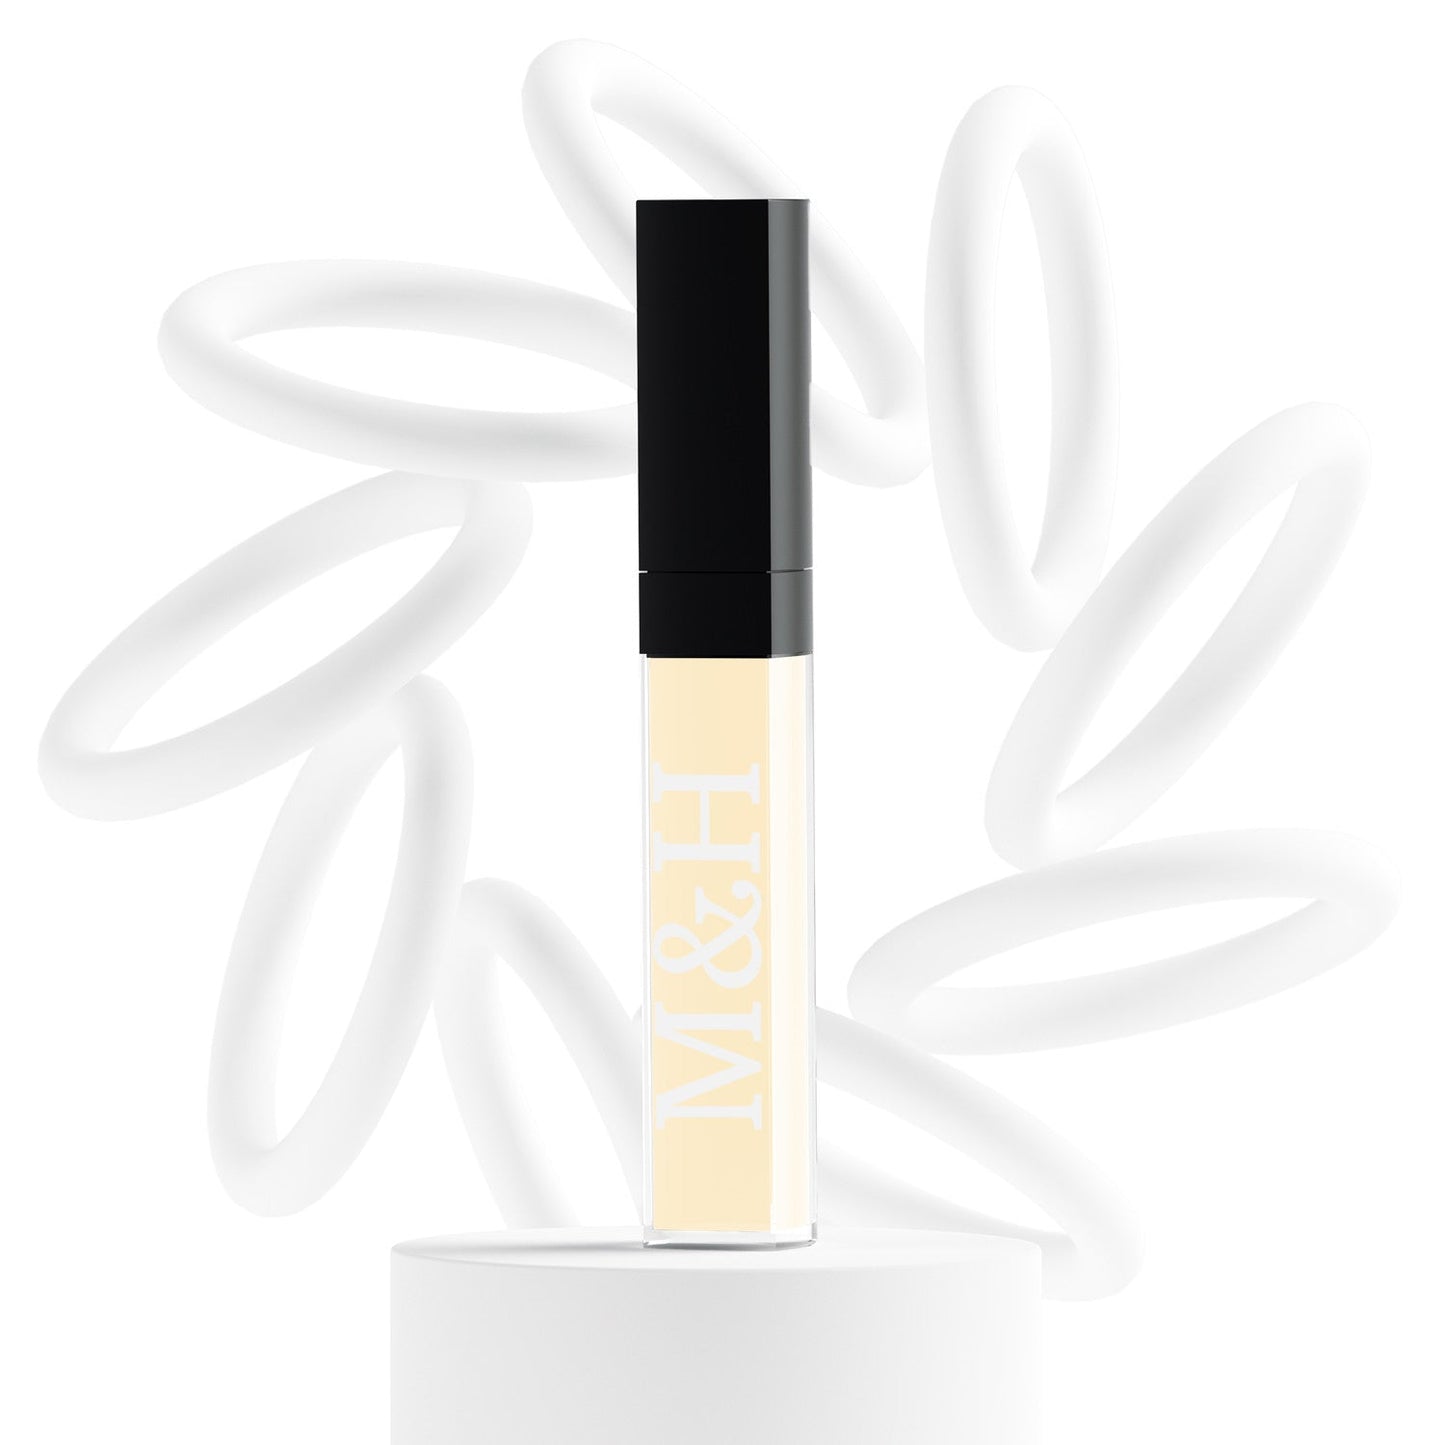 Vegan Concealers - M&H FashionVegan ConcealersconcealerM&H FashionM&H FashionConcealer-950Light IvoryVegan ConcealersM&H FashionconcealerM&H Fashion This multifunctional concealer is designed to cover under-eye circles, complexion alterations, and major imperfections like scars, hyperpigmentation, burns, and tatVegan Concealers